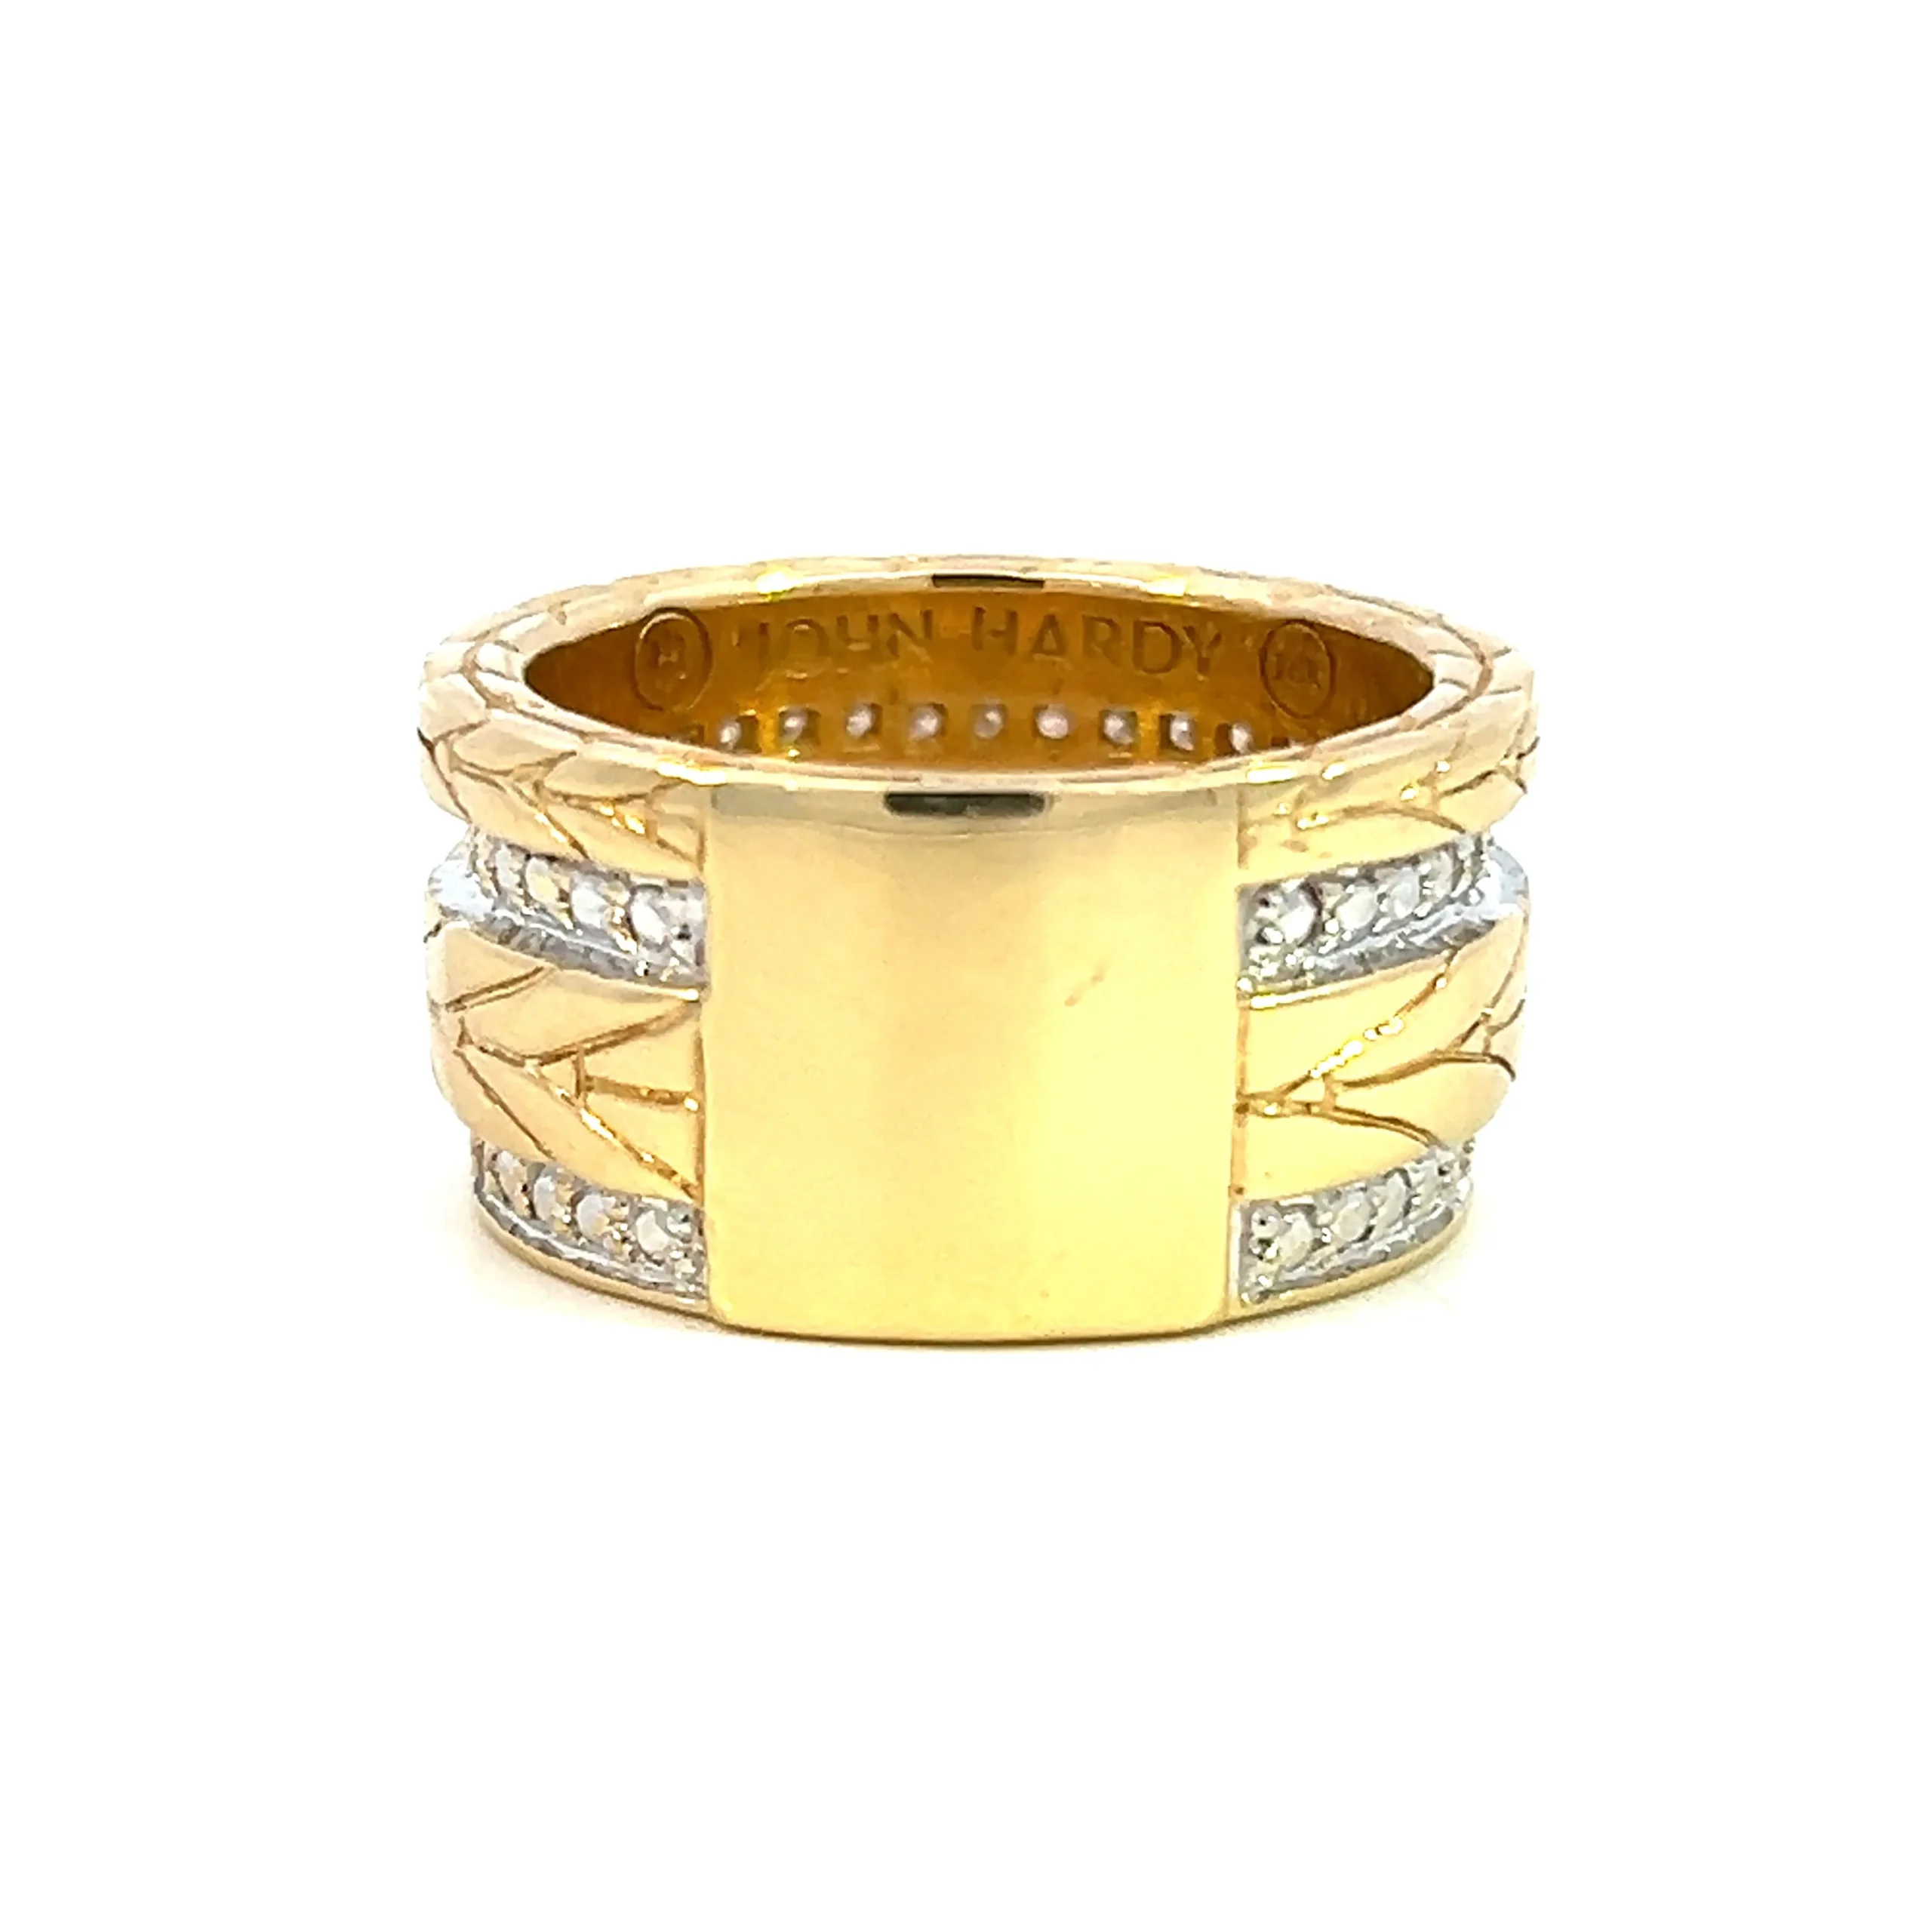 estate 18 karat yellow and white gold 11mm wide band set with engraved leaf designs in yellow gold and 50 round brilliant diamonds weighing 0.50 total carat weight in inset white gold in two offset strand on the band.